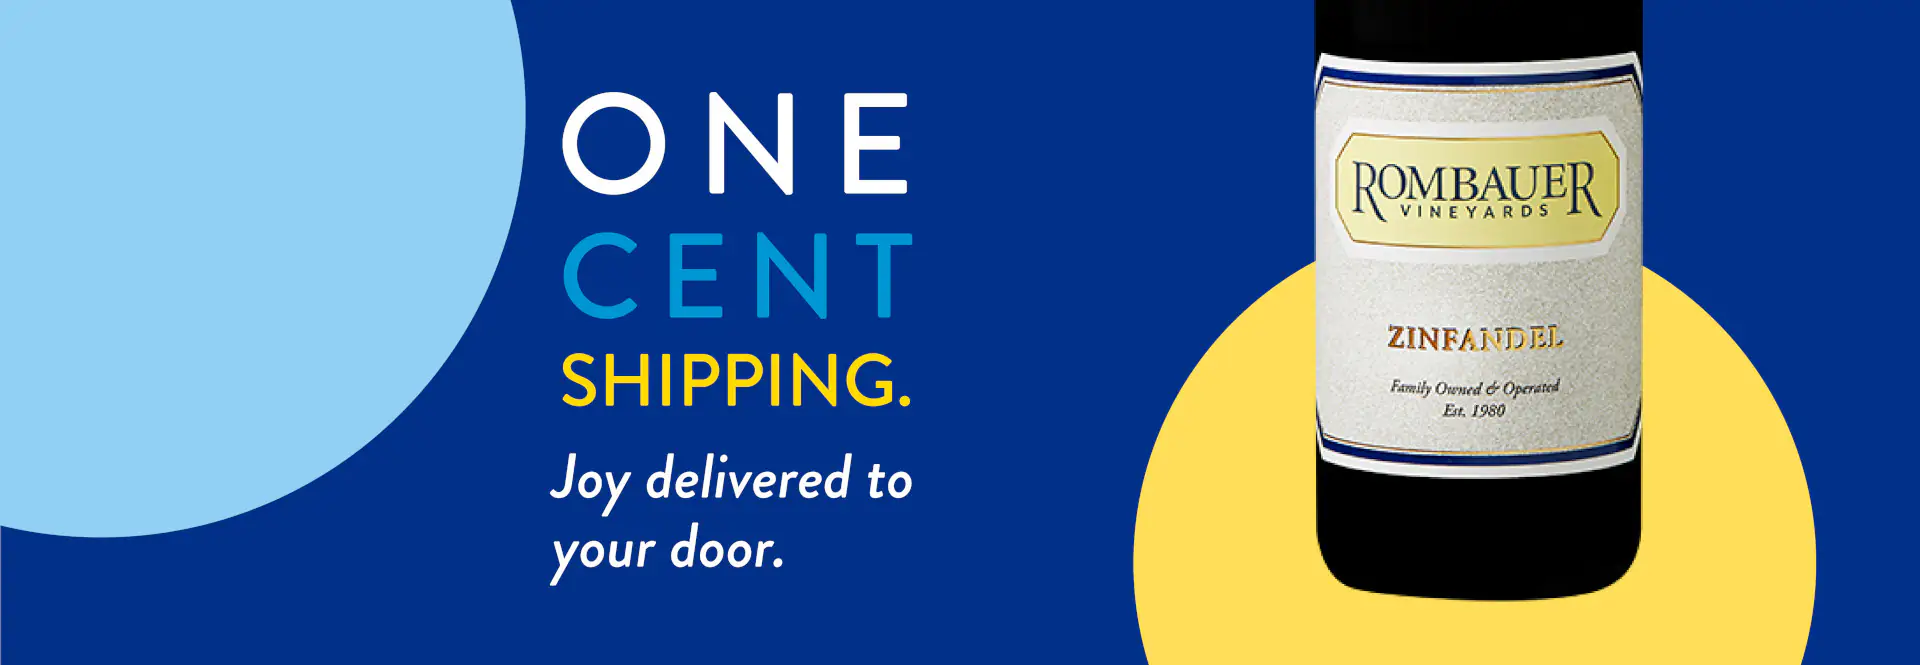 One cent shipping